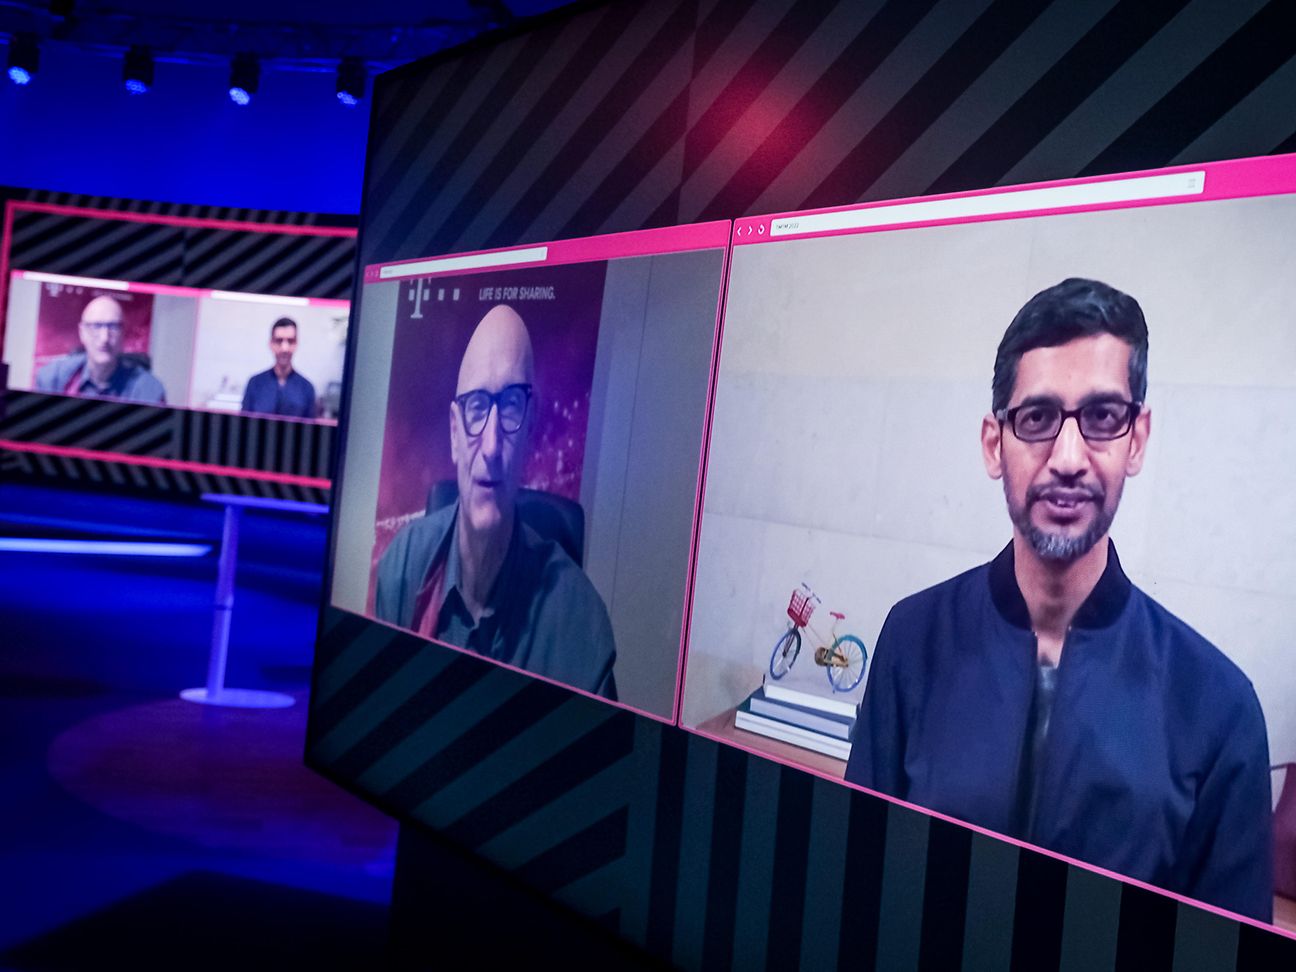 CEOs chatting via video: Tim Höttges and Sundar Pichai discussing the latest news about the partnership between Deutsche Telekom and Google.